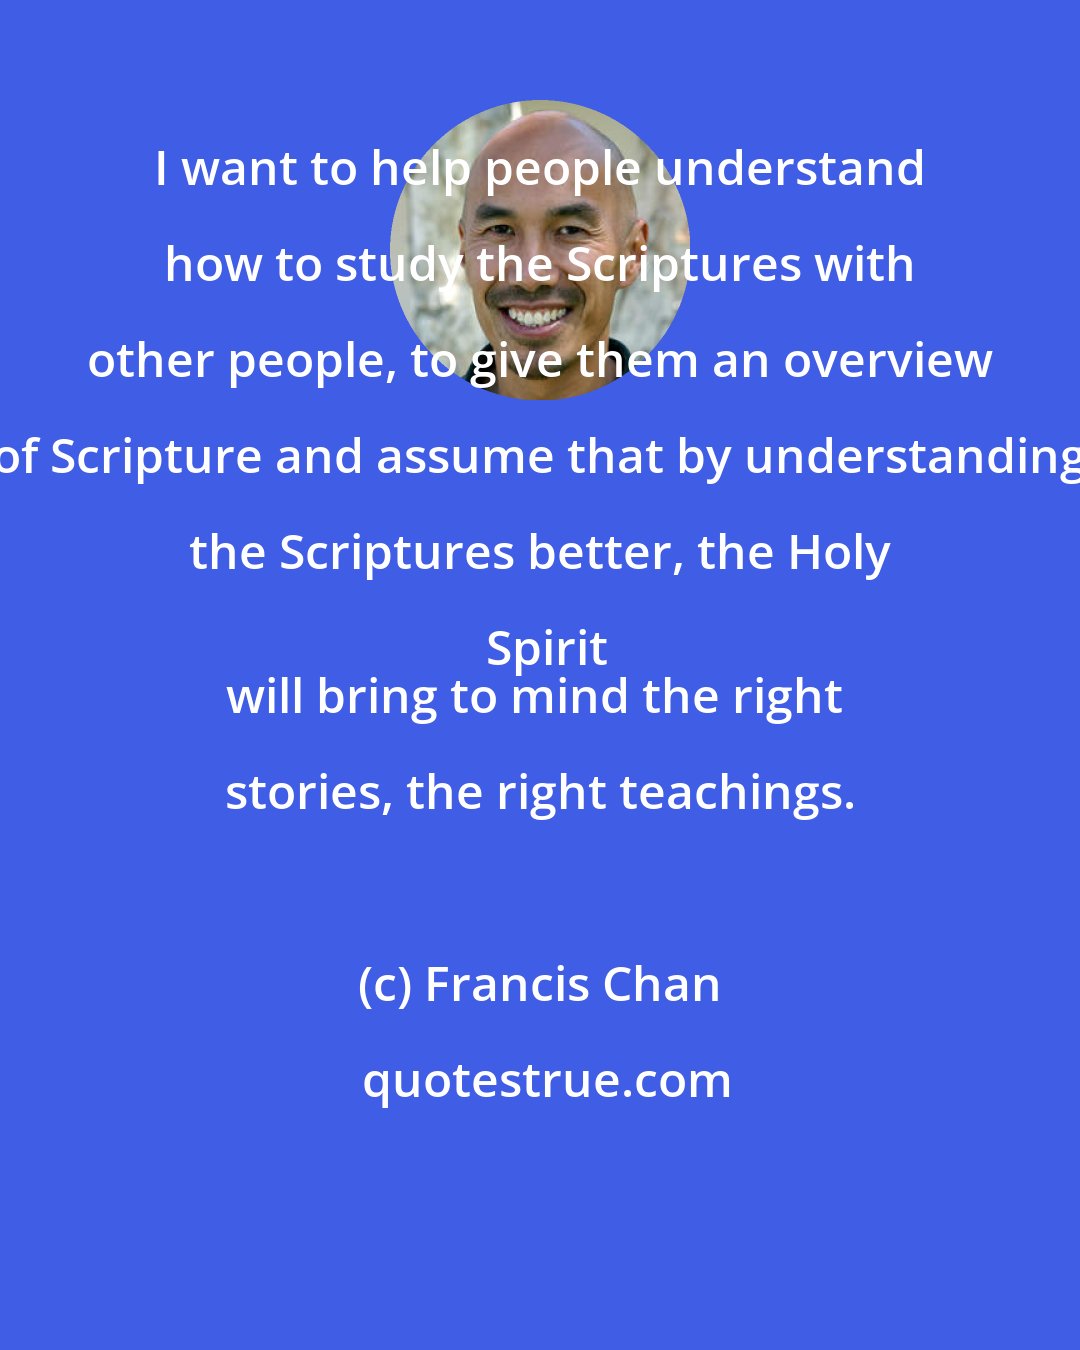 Francis Chan: I want to help people understand how to study the Scriptures with other people, to give them an overview of Scripture and assume that by understanding the Scriptures better, the Holy Spirit
will bring to mind the right stories, the right teachings.